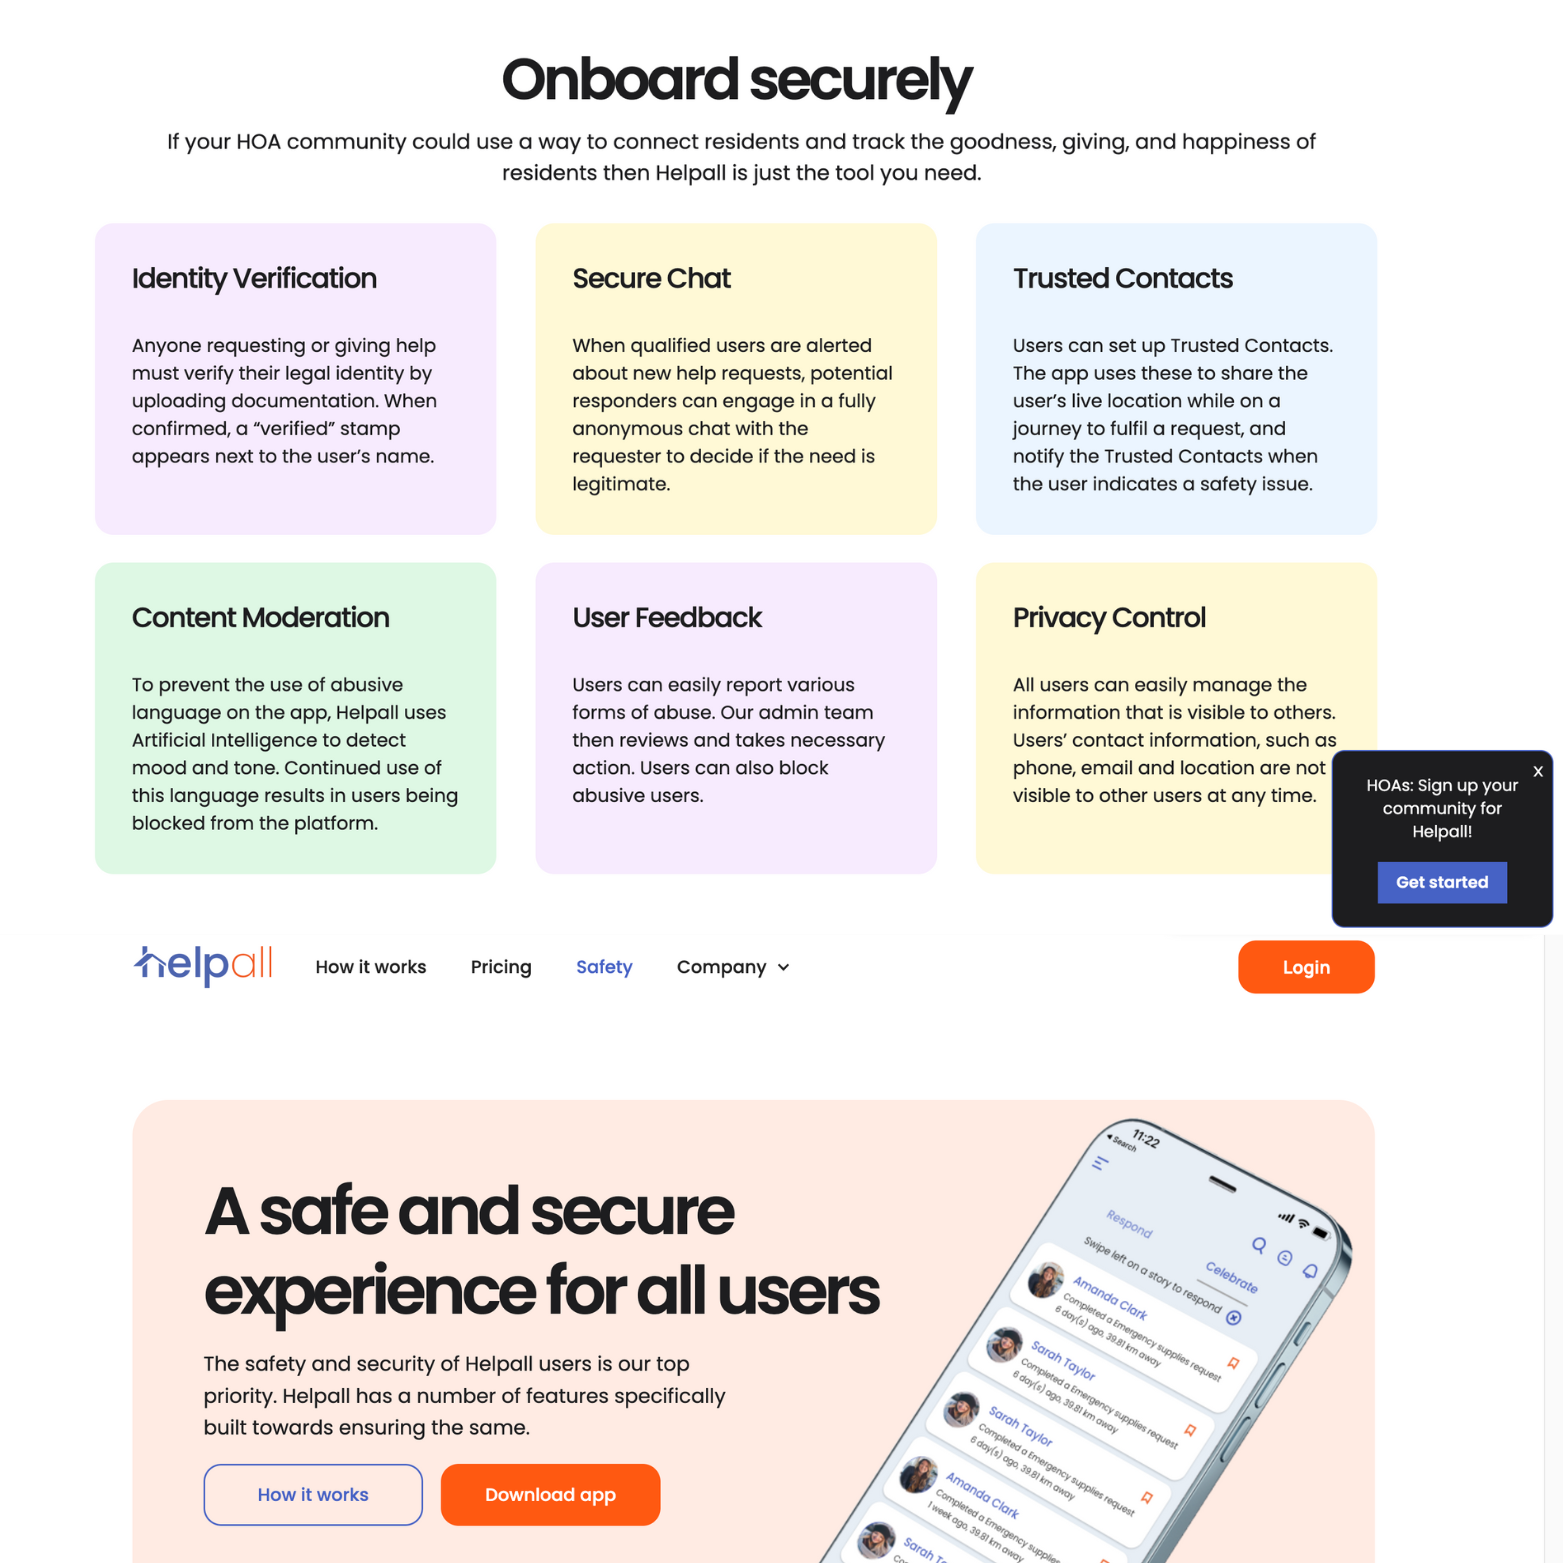 The safety and security of Helpall users is our top priority